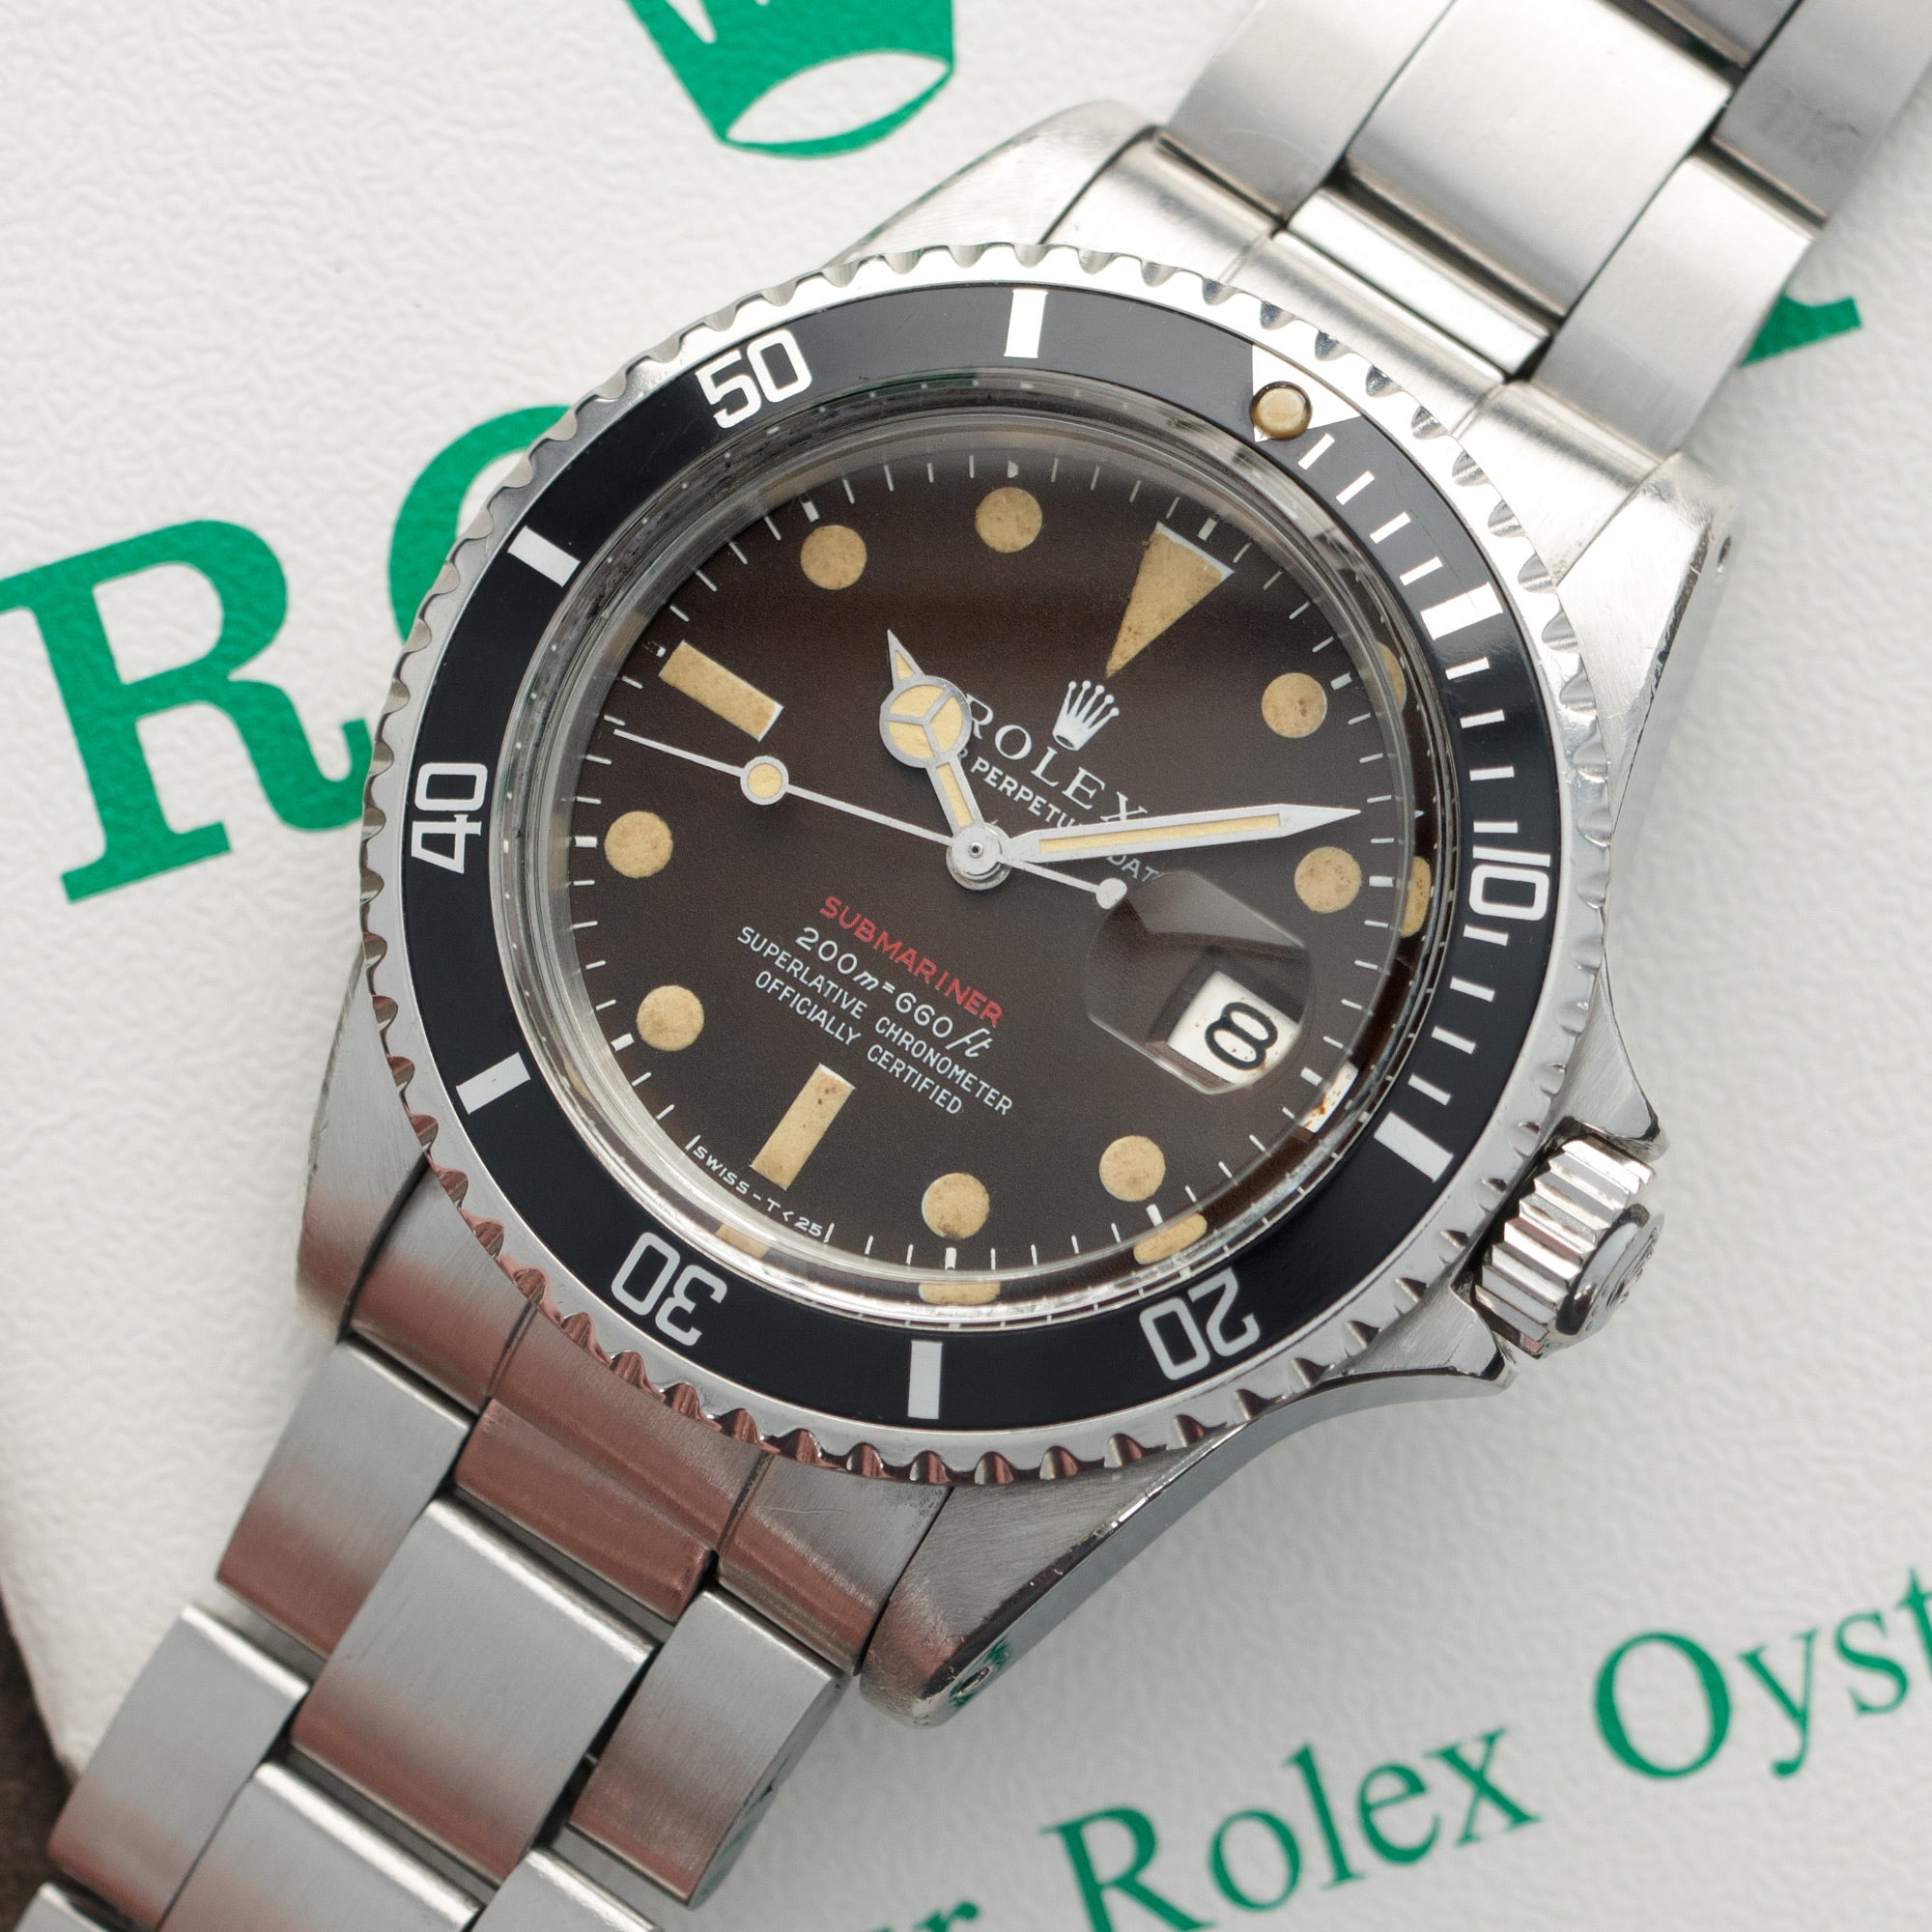 Rolex - Rolex Red Submariner Tropical Brown Watch Ref. 1680, with Original Box and Papers - The Keystone Watches